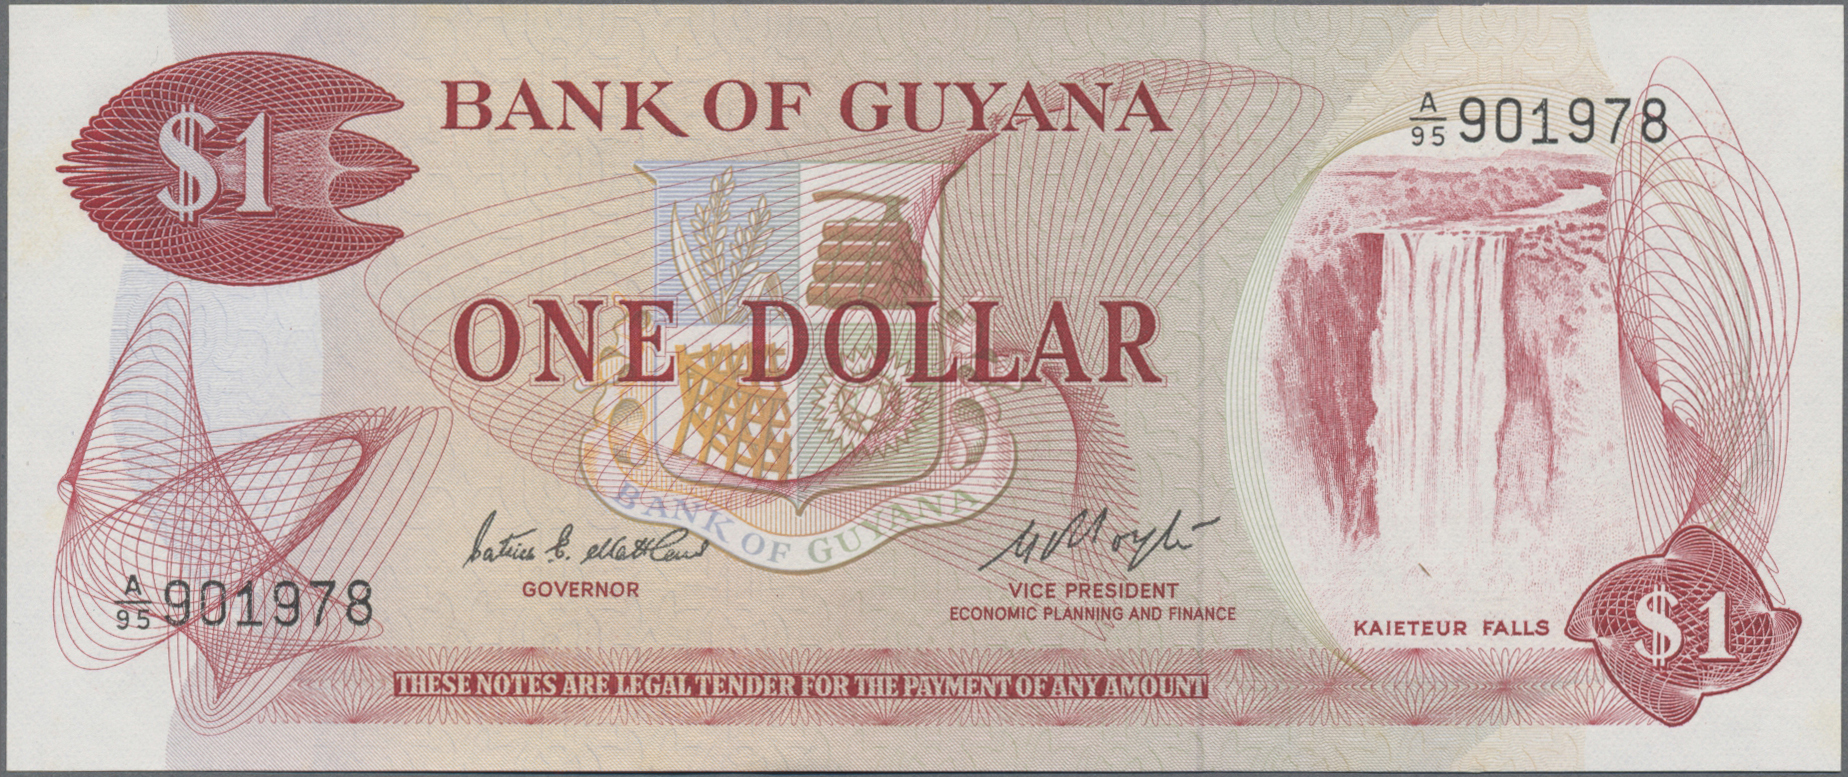 Lot 00403 - Guyana | Banknoten  -  Auktionshaus Christoph Gärtner GmbH & Co. KG 54th AUCTION - Day 1 Coins & Banknotes